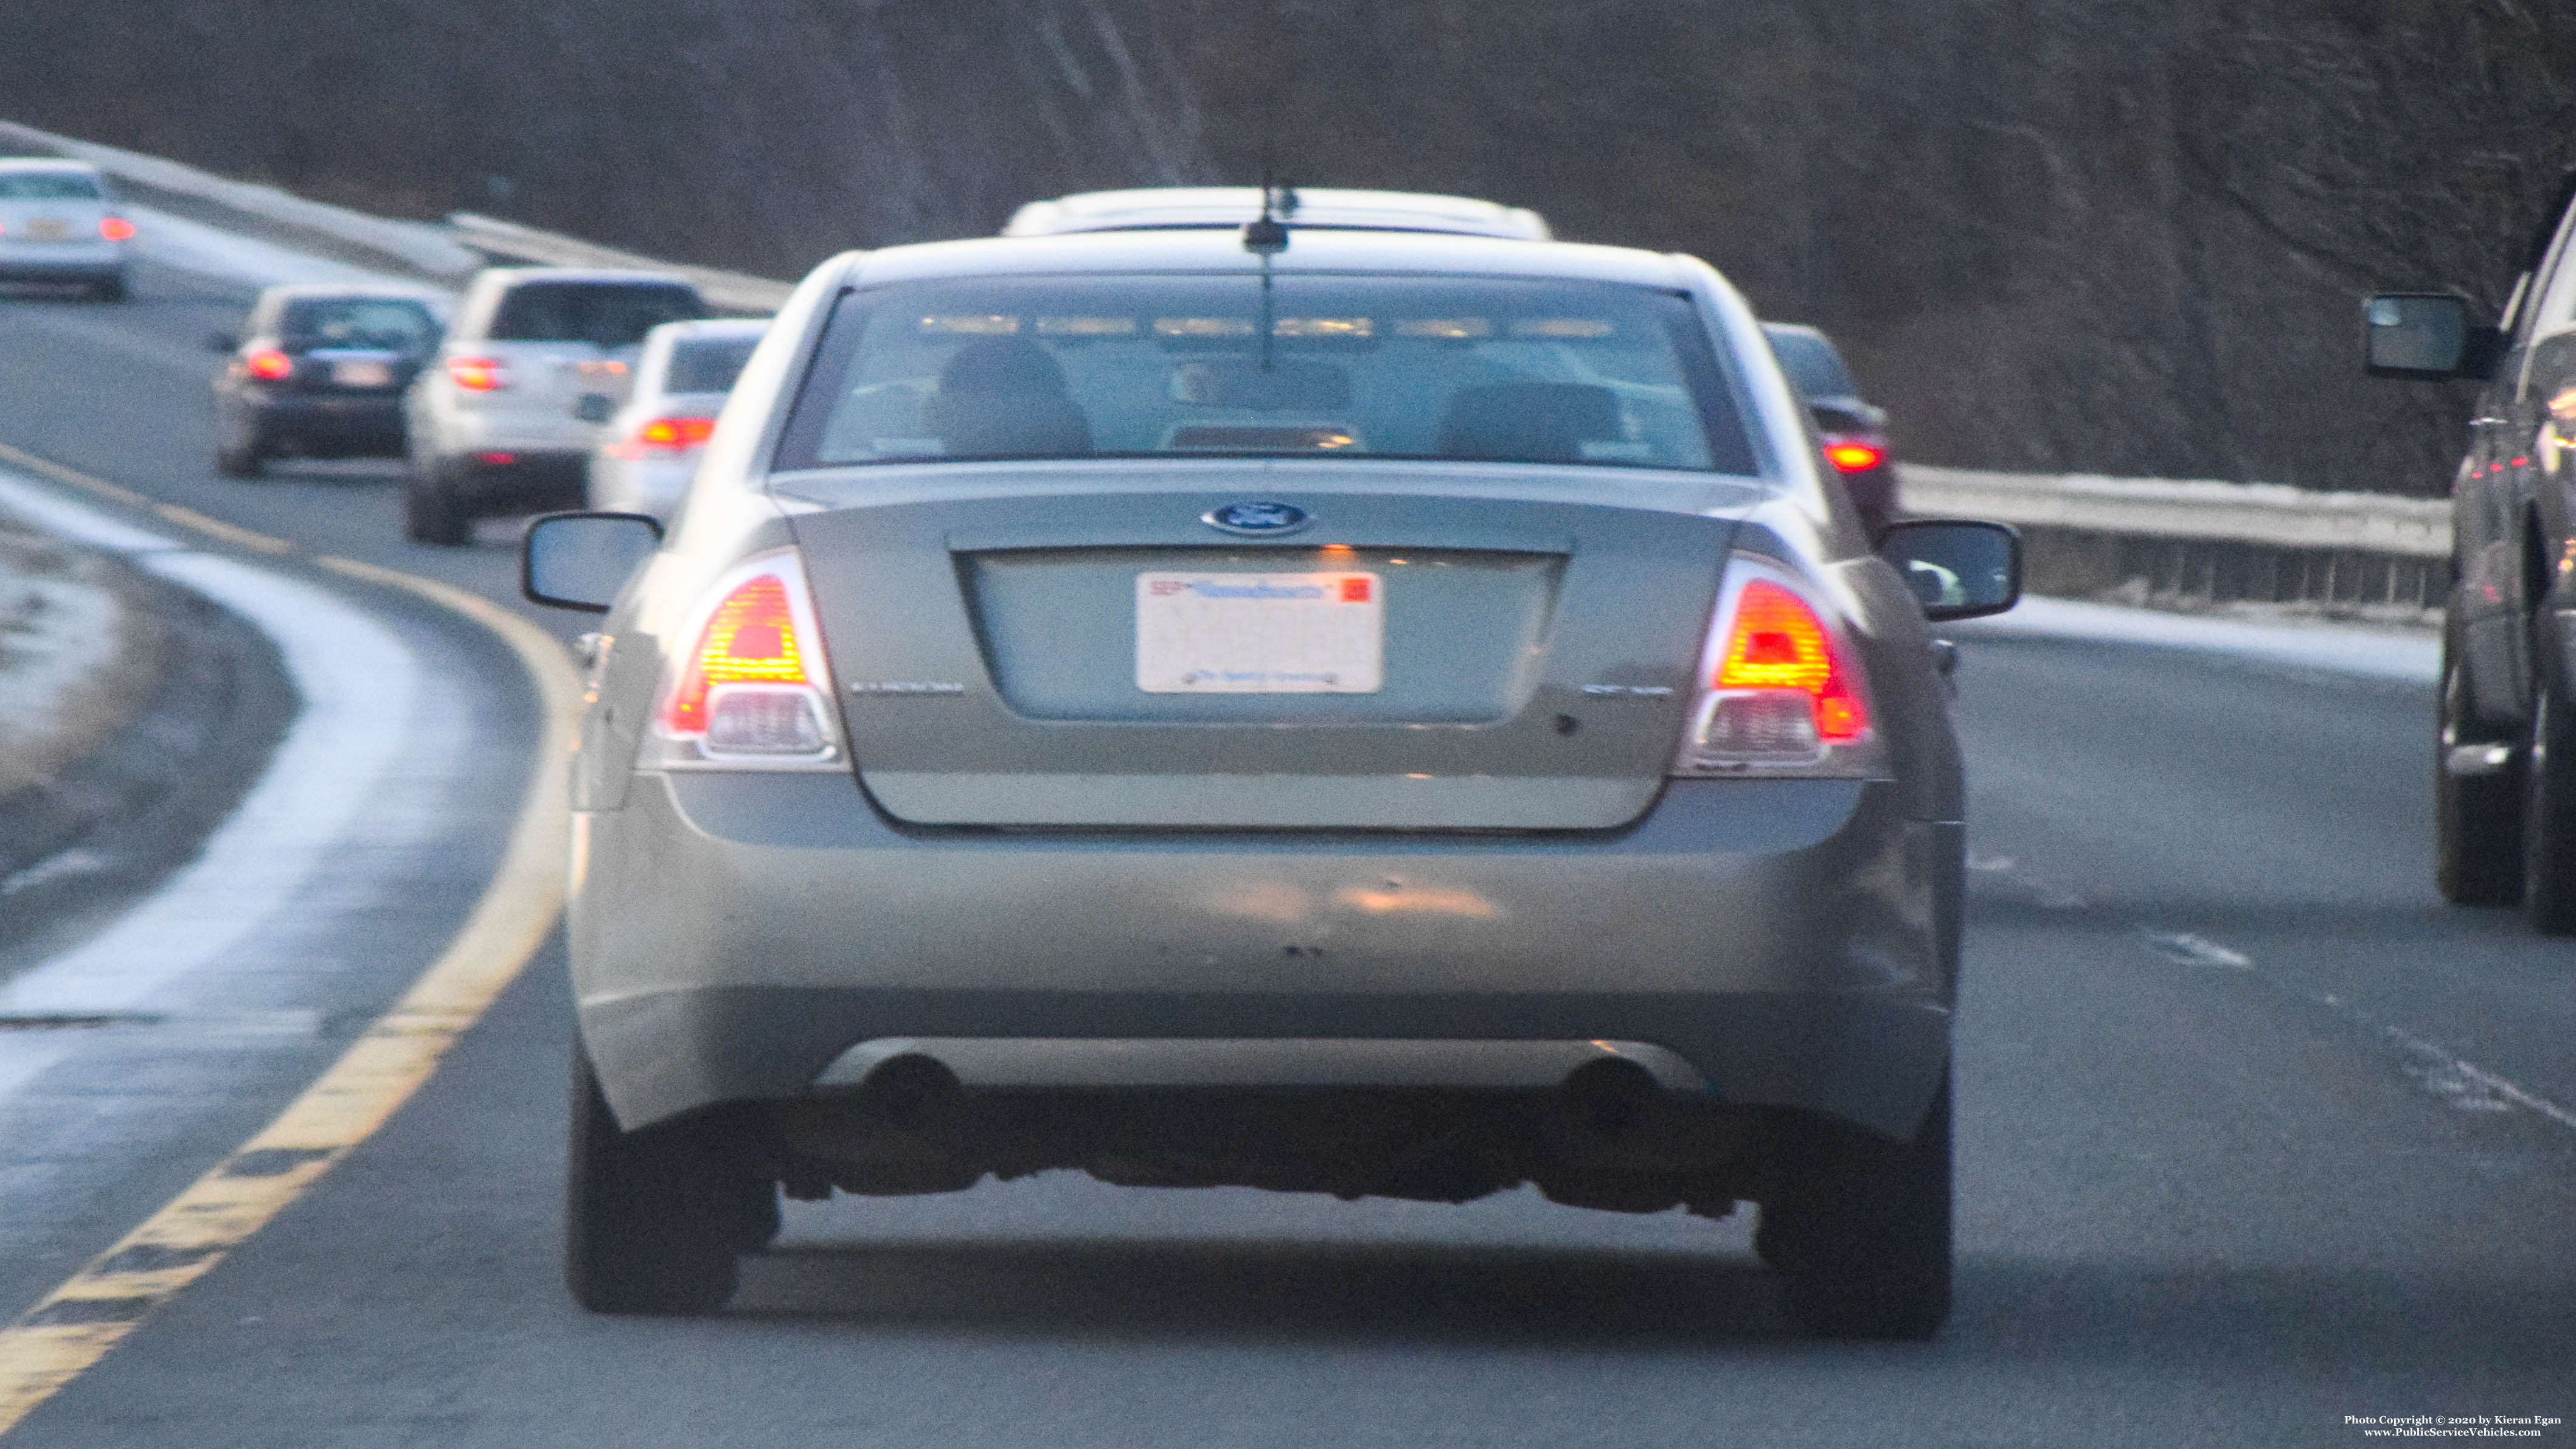 A photo  of Massachusetts State Police
            Unmarked Unit, a 2010-2012 Ford Fusion             taken by Kieran Egan